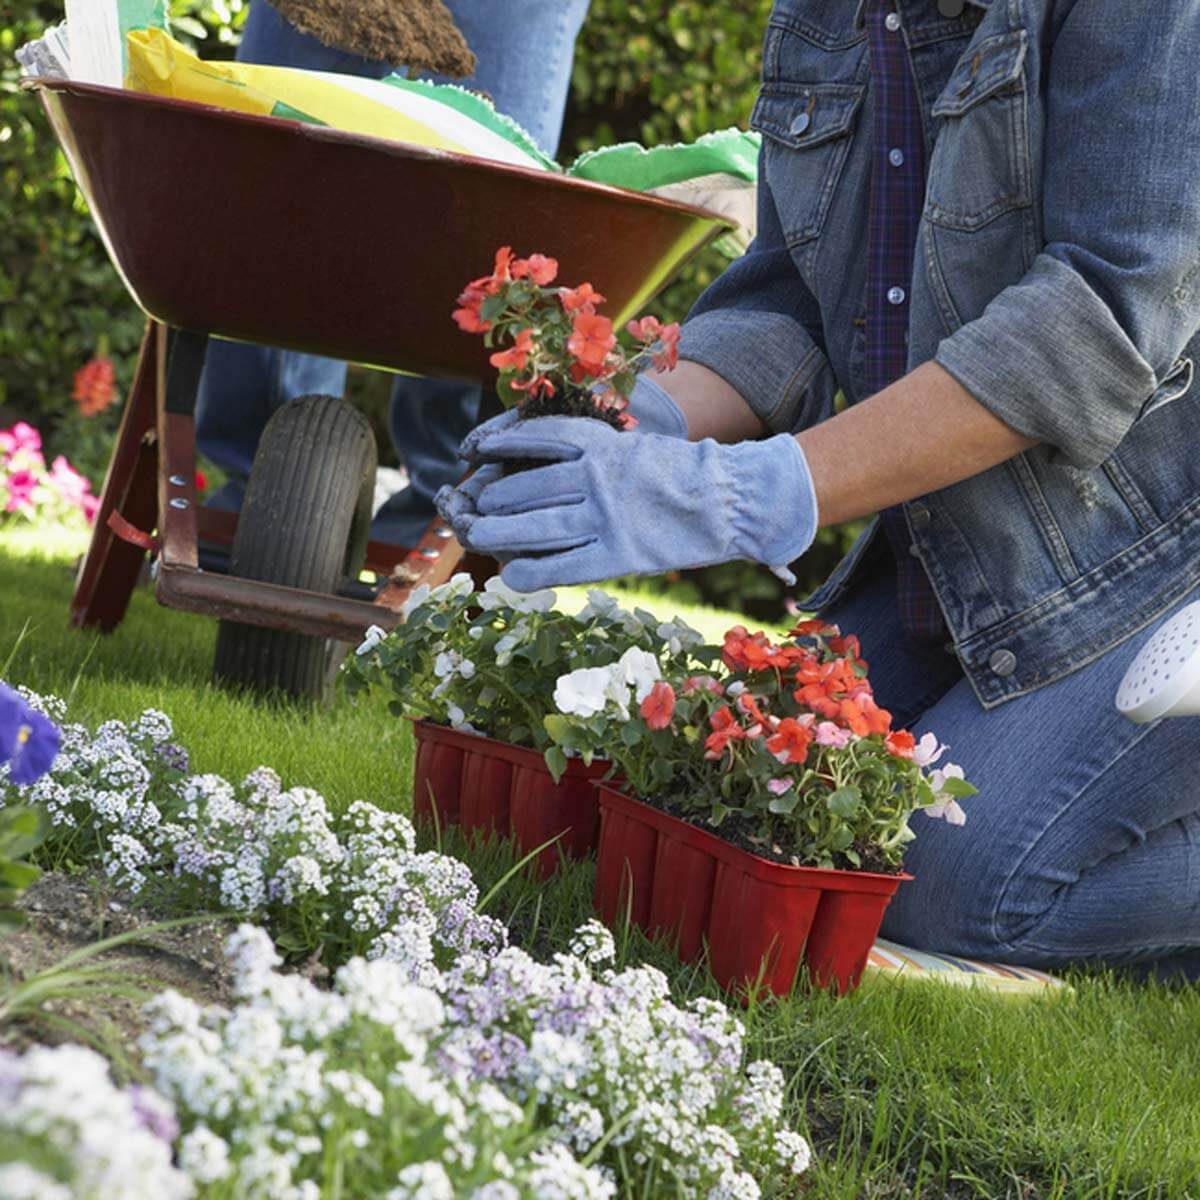 10 Handy Gardening Tips for Busy People